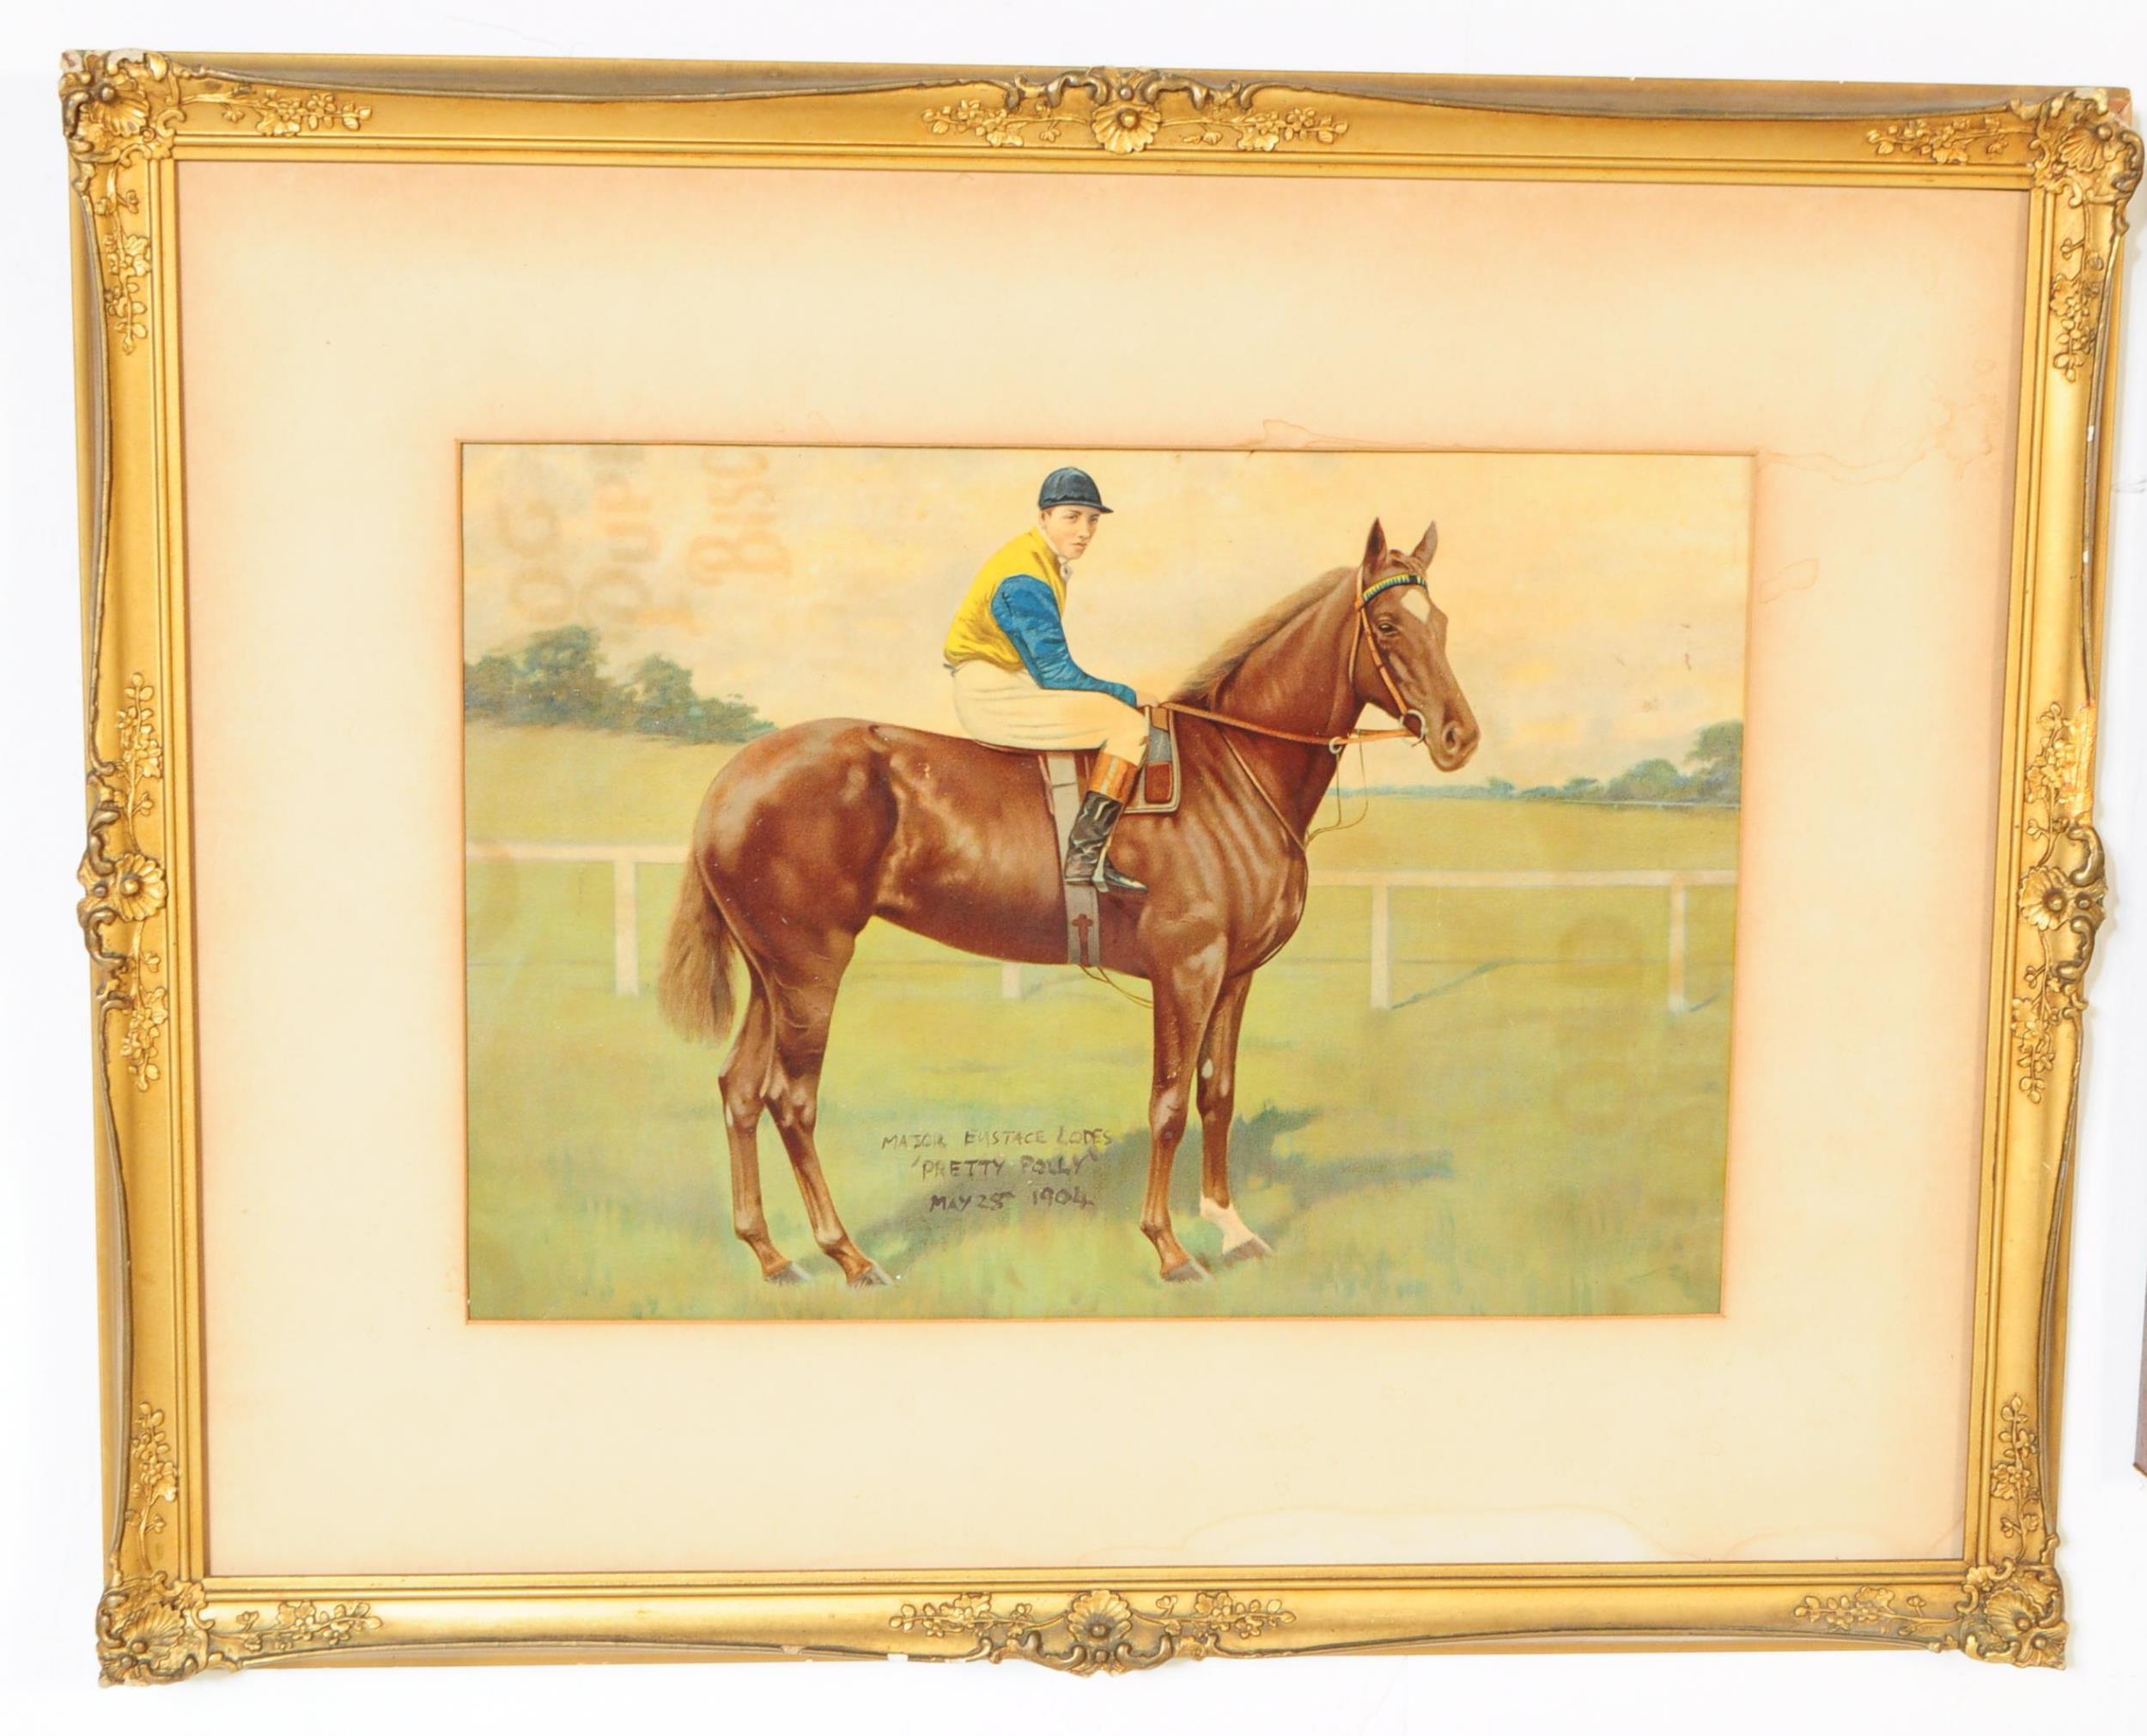 EQUESTRIAN INTEREST - COLLECTION OF HORSE RACING PRINTS - Image 3 of 8